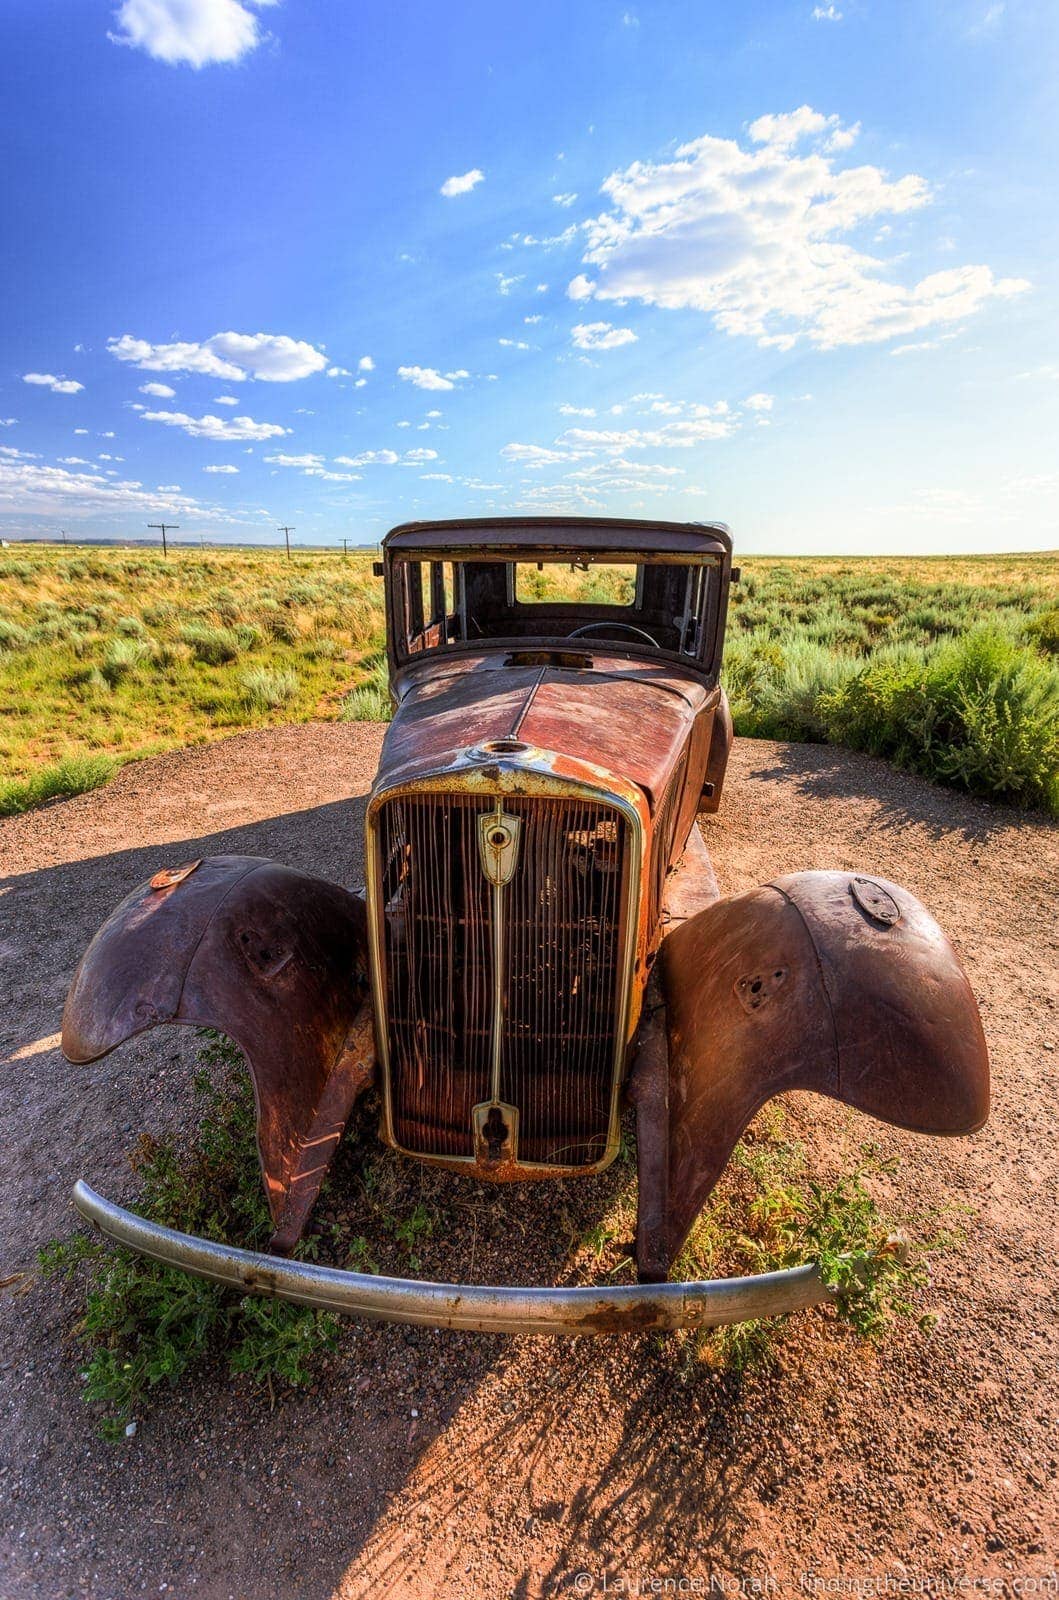 Old car on Route 66 Painted desert Arizona